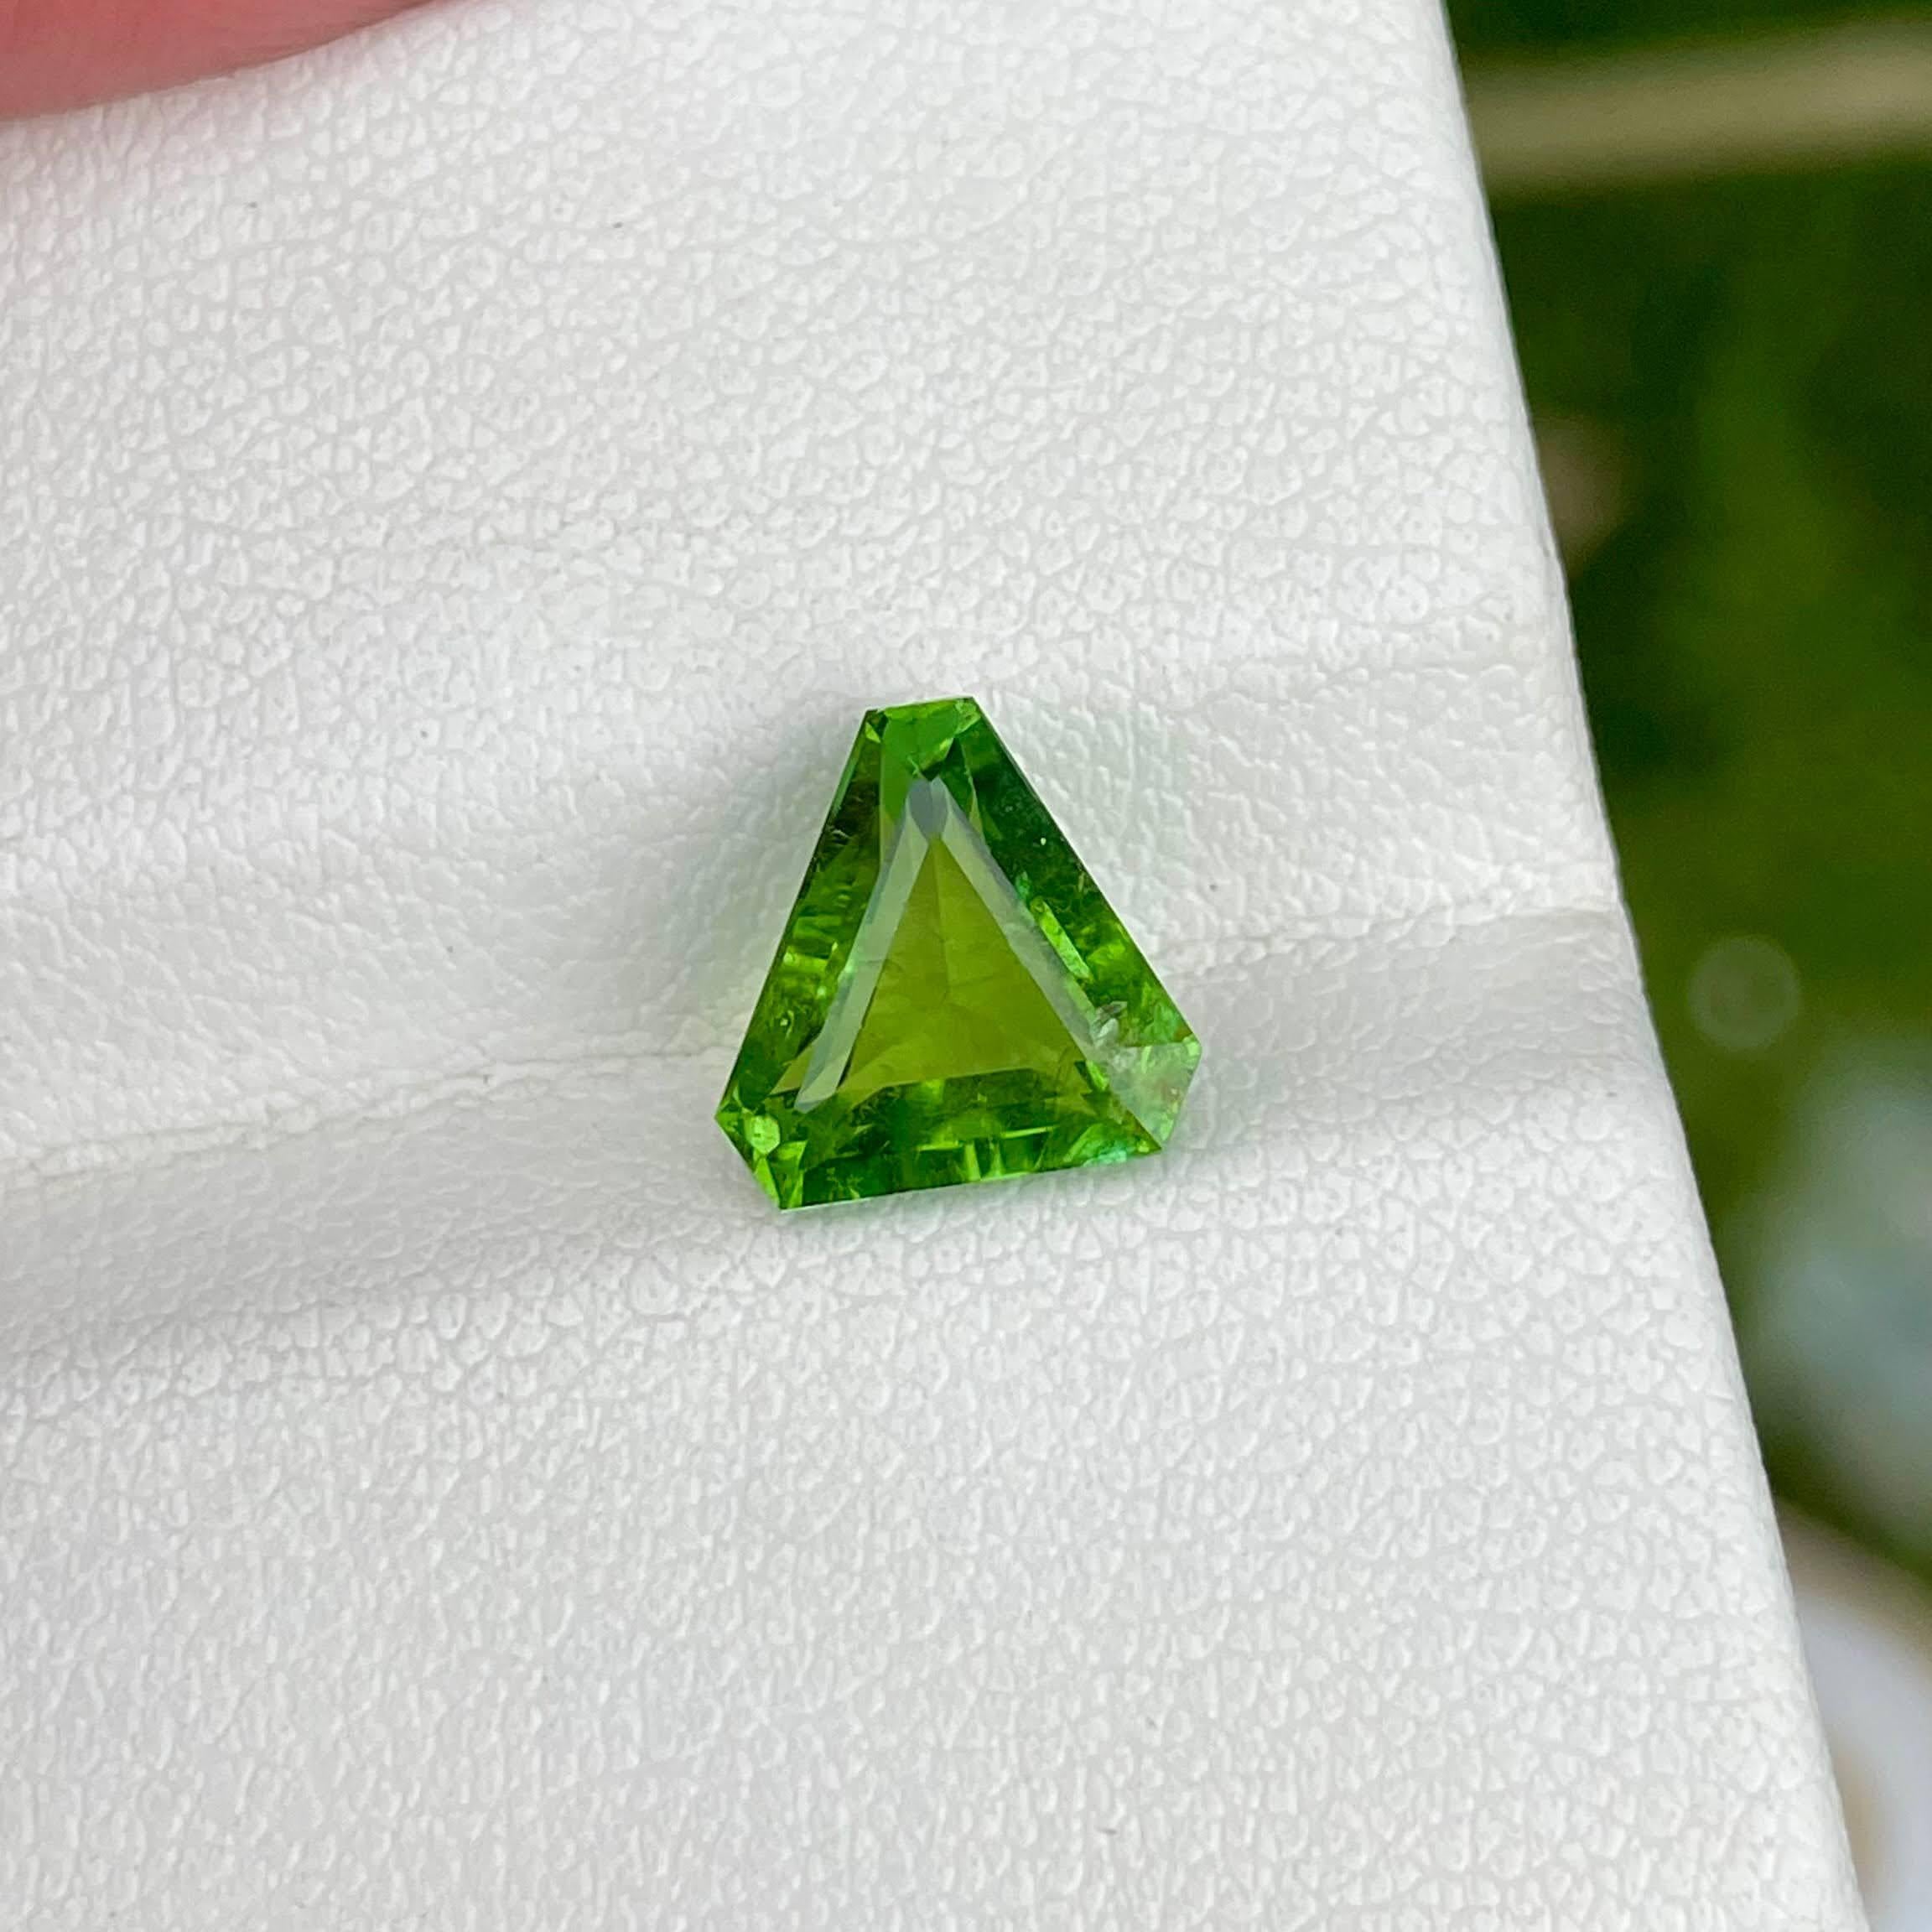 Weight 2.50 carats 
Dimensions 8.9x8.2x5.4 mm
Treatment none 
Origin Nigeria 
Clarity SI
Shape Triangular 
Cut Trilliant 



The Green Tourmaline Stone you possess is a captivating gem of natural origin, originating from the rich geological reserves